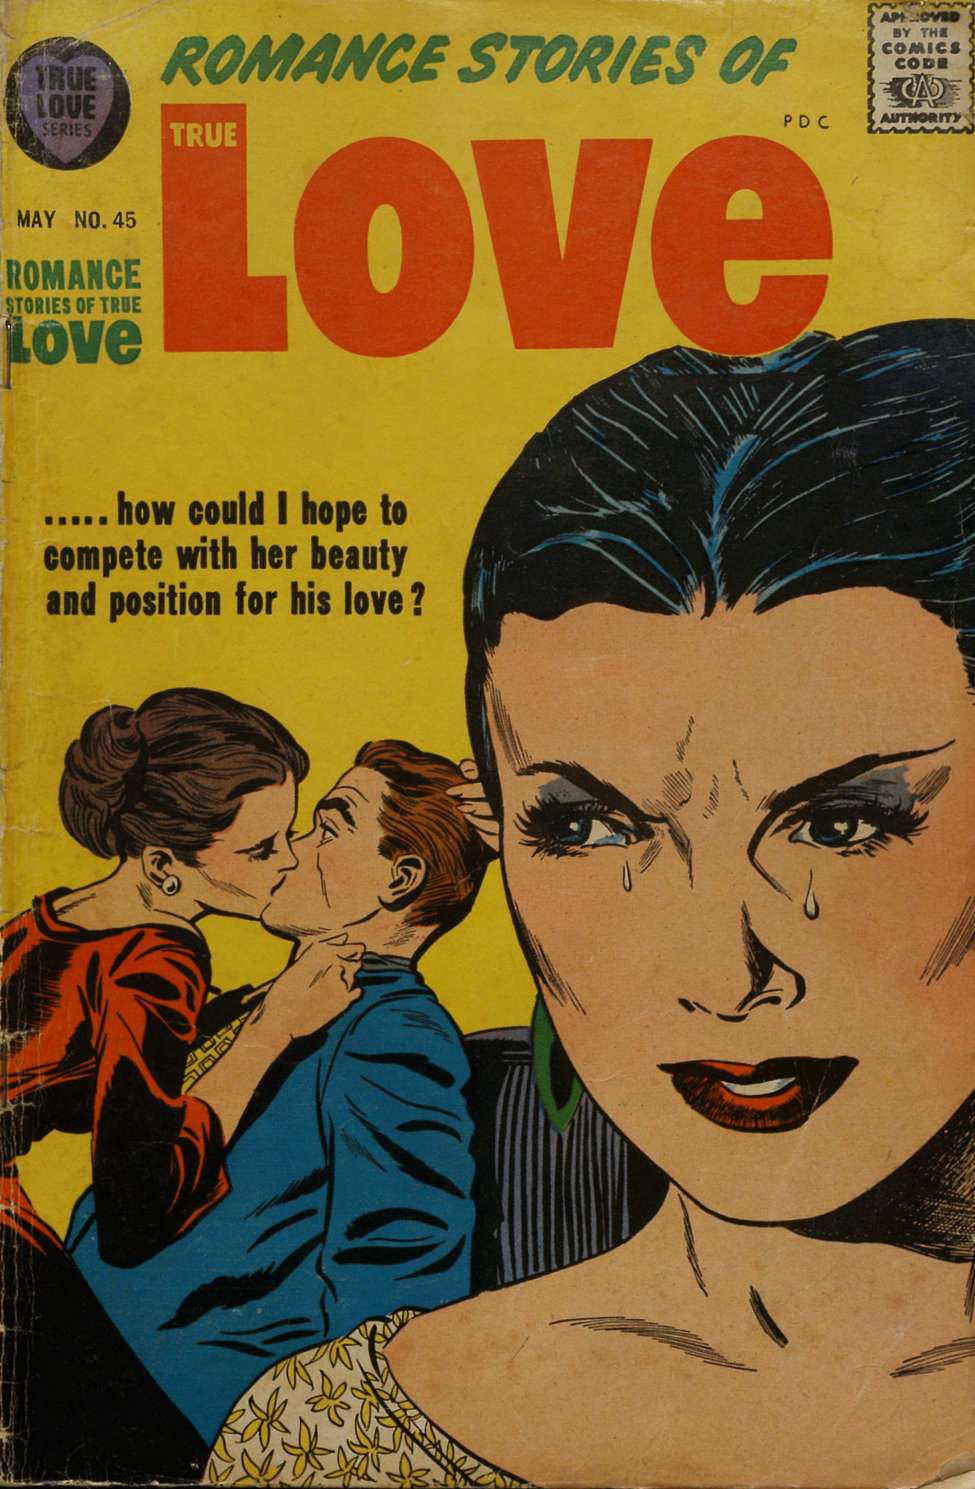 Book Cover For Romance Stories of True Love 45 - Version 1